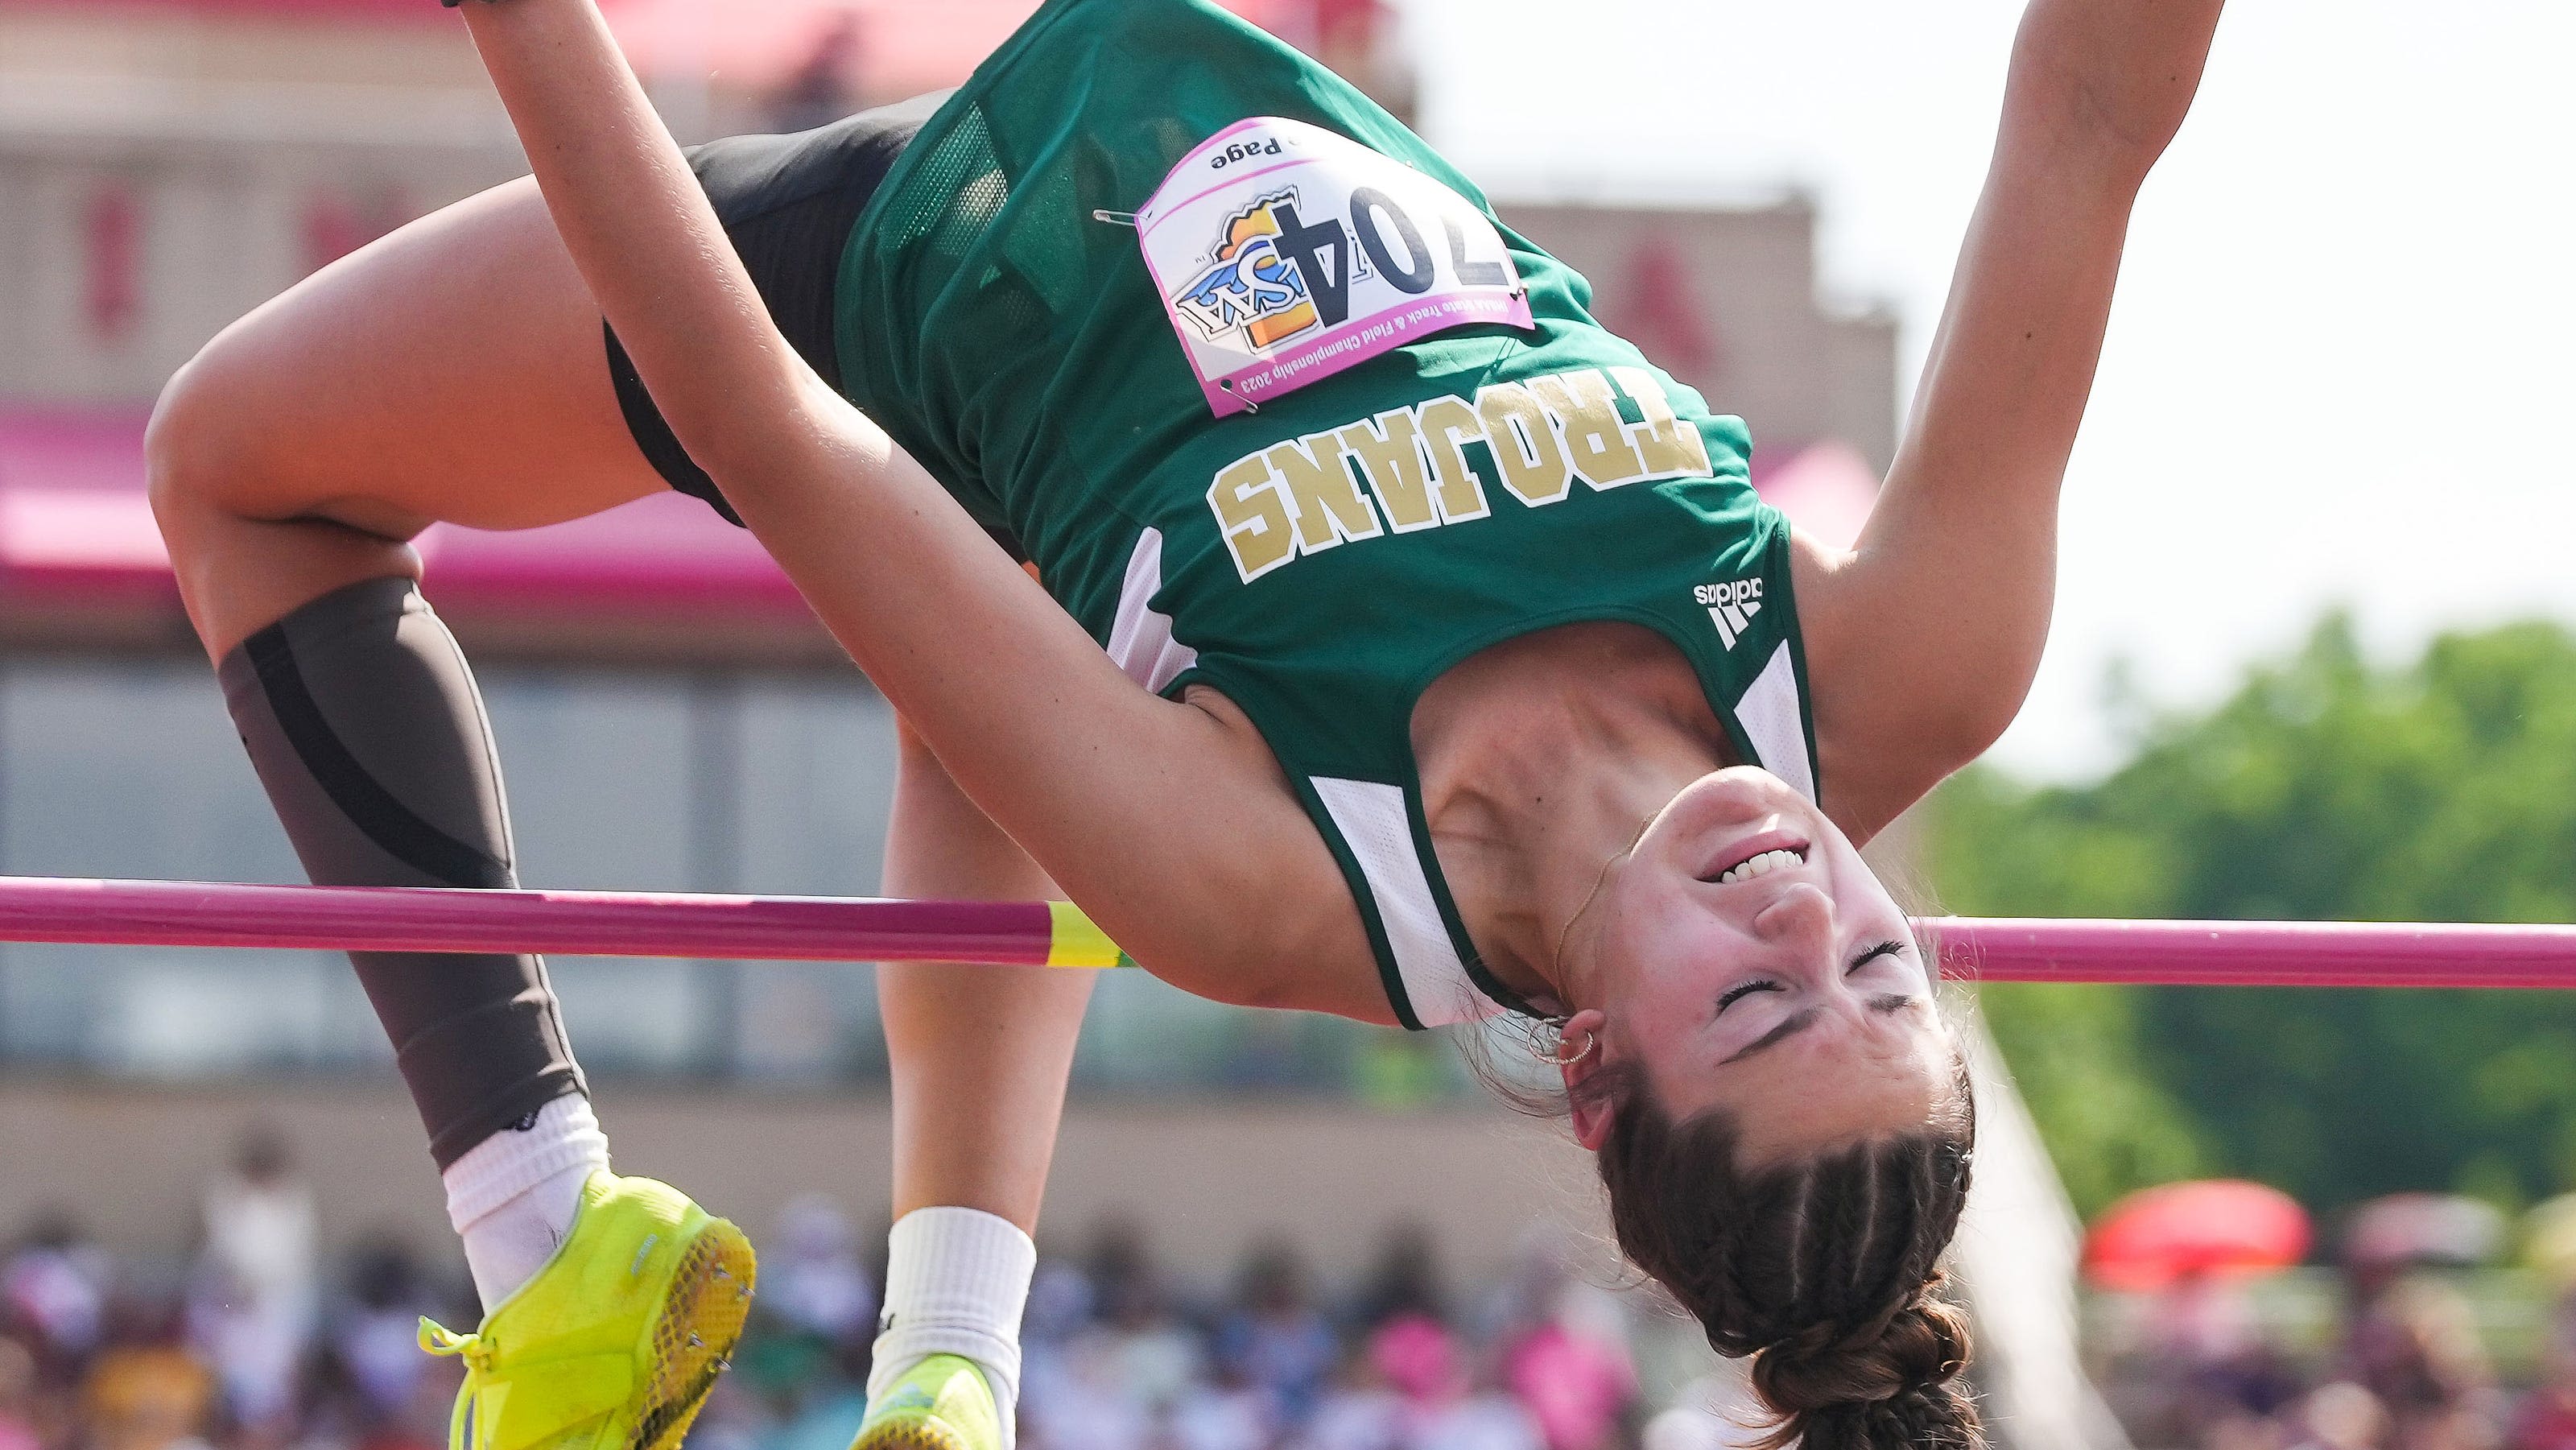 Back to back? Meet the only defending IHSAA track and field state champion in SW Indiana